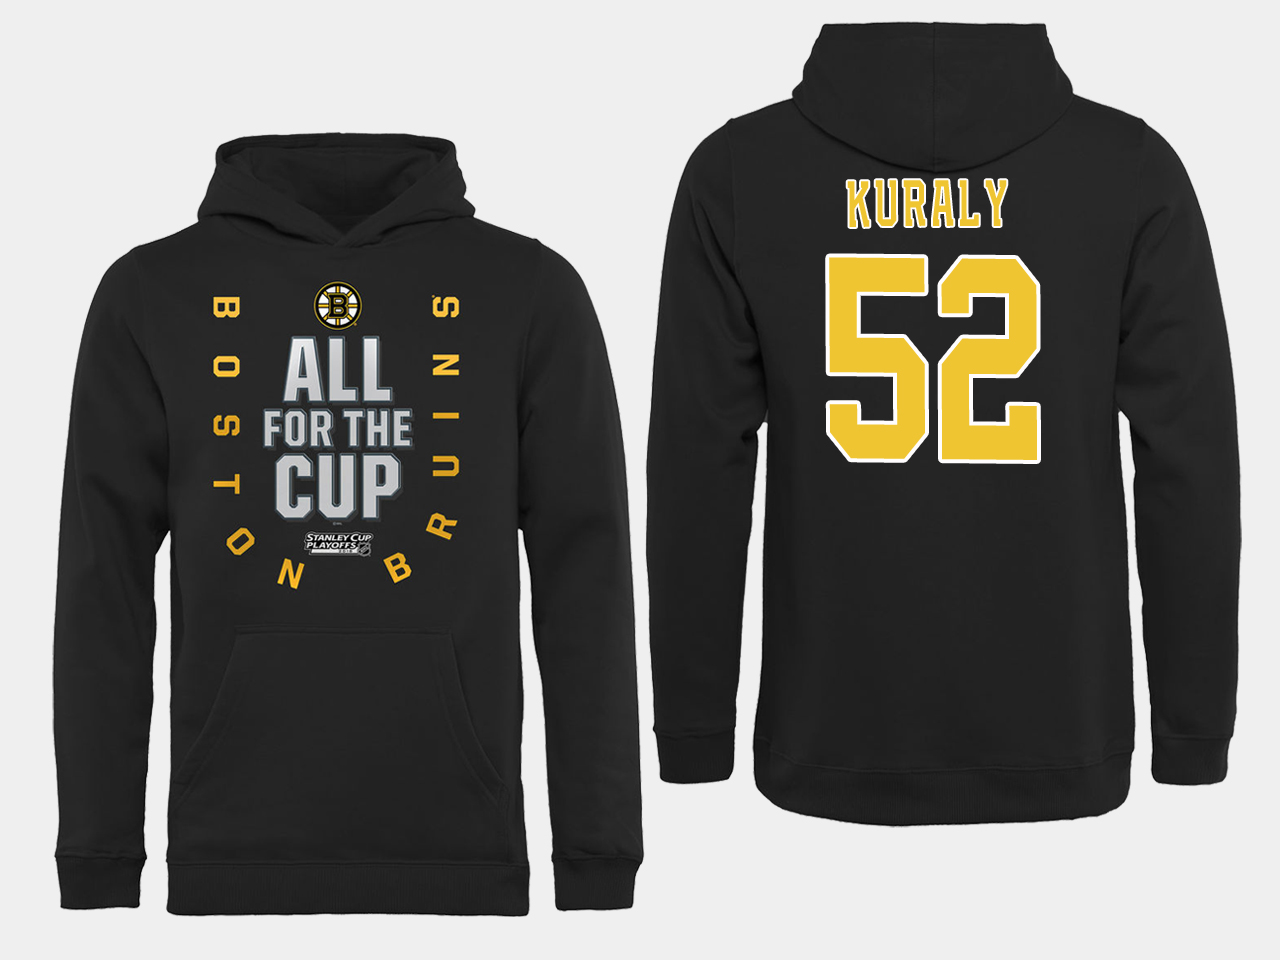 NHL Men Boston Bruins #52 Kuraly Black All for the Cup Hoodie->boston bruins->NHL Jersey